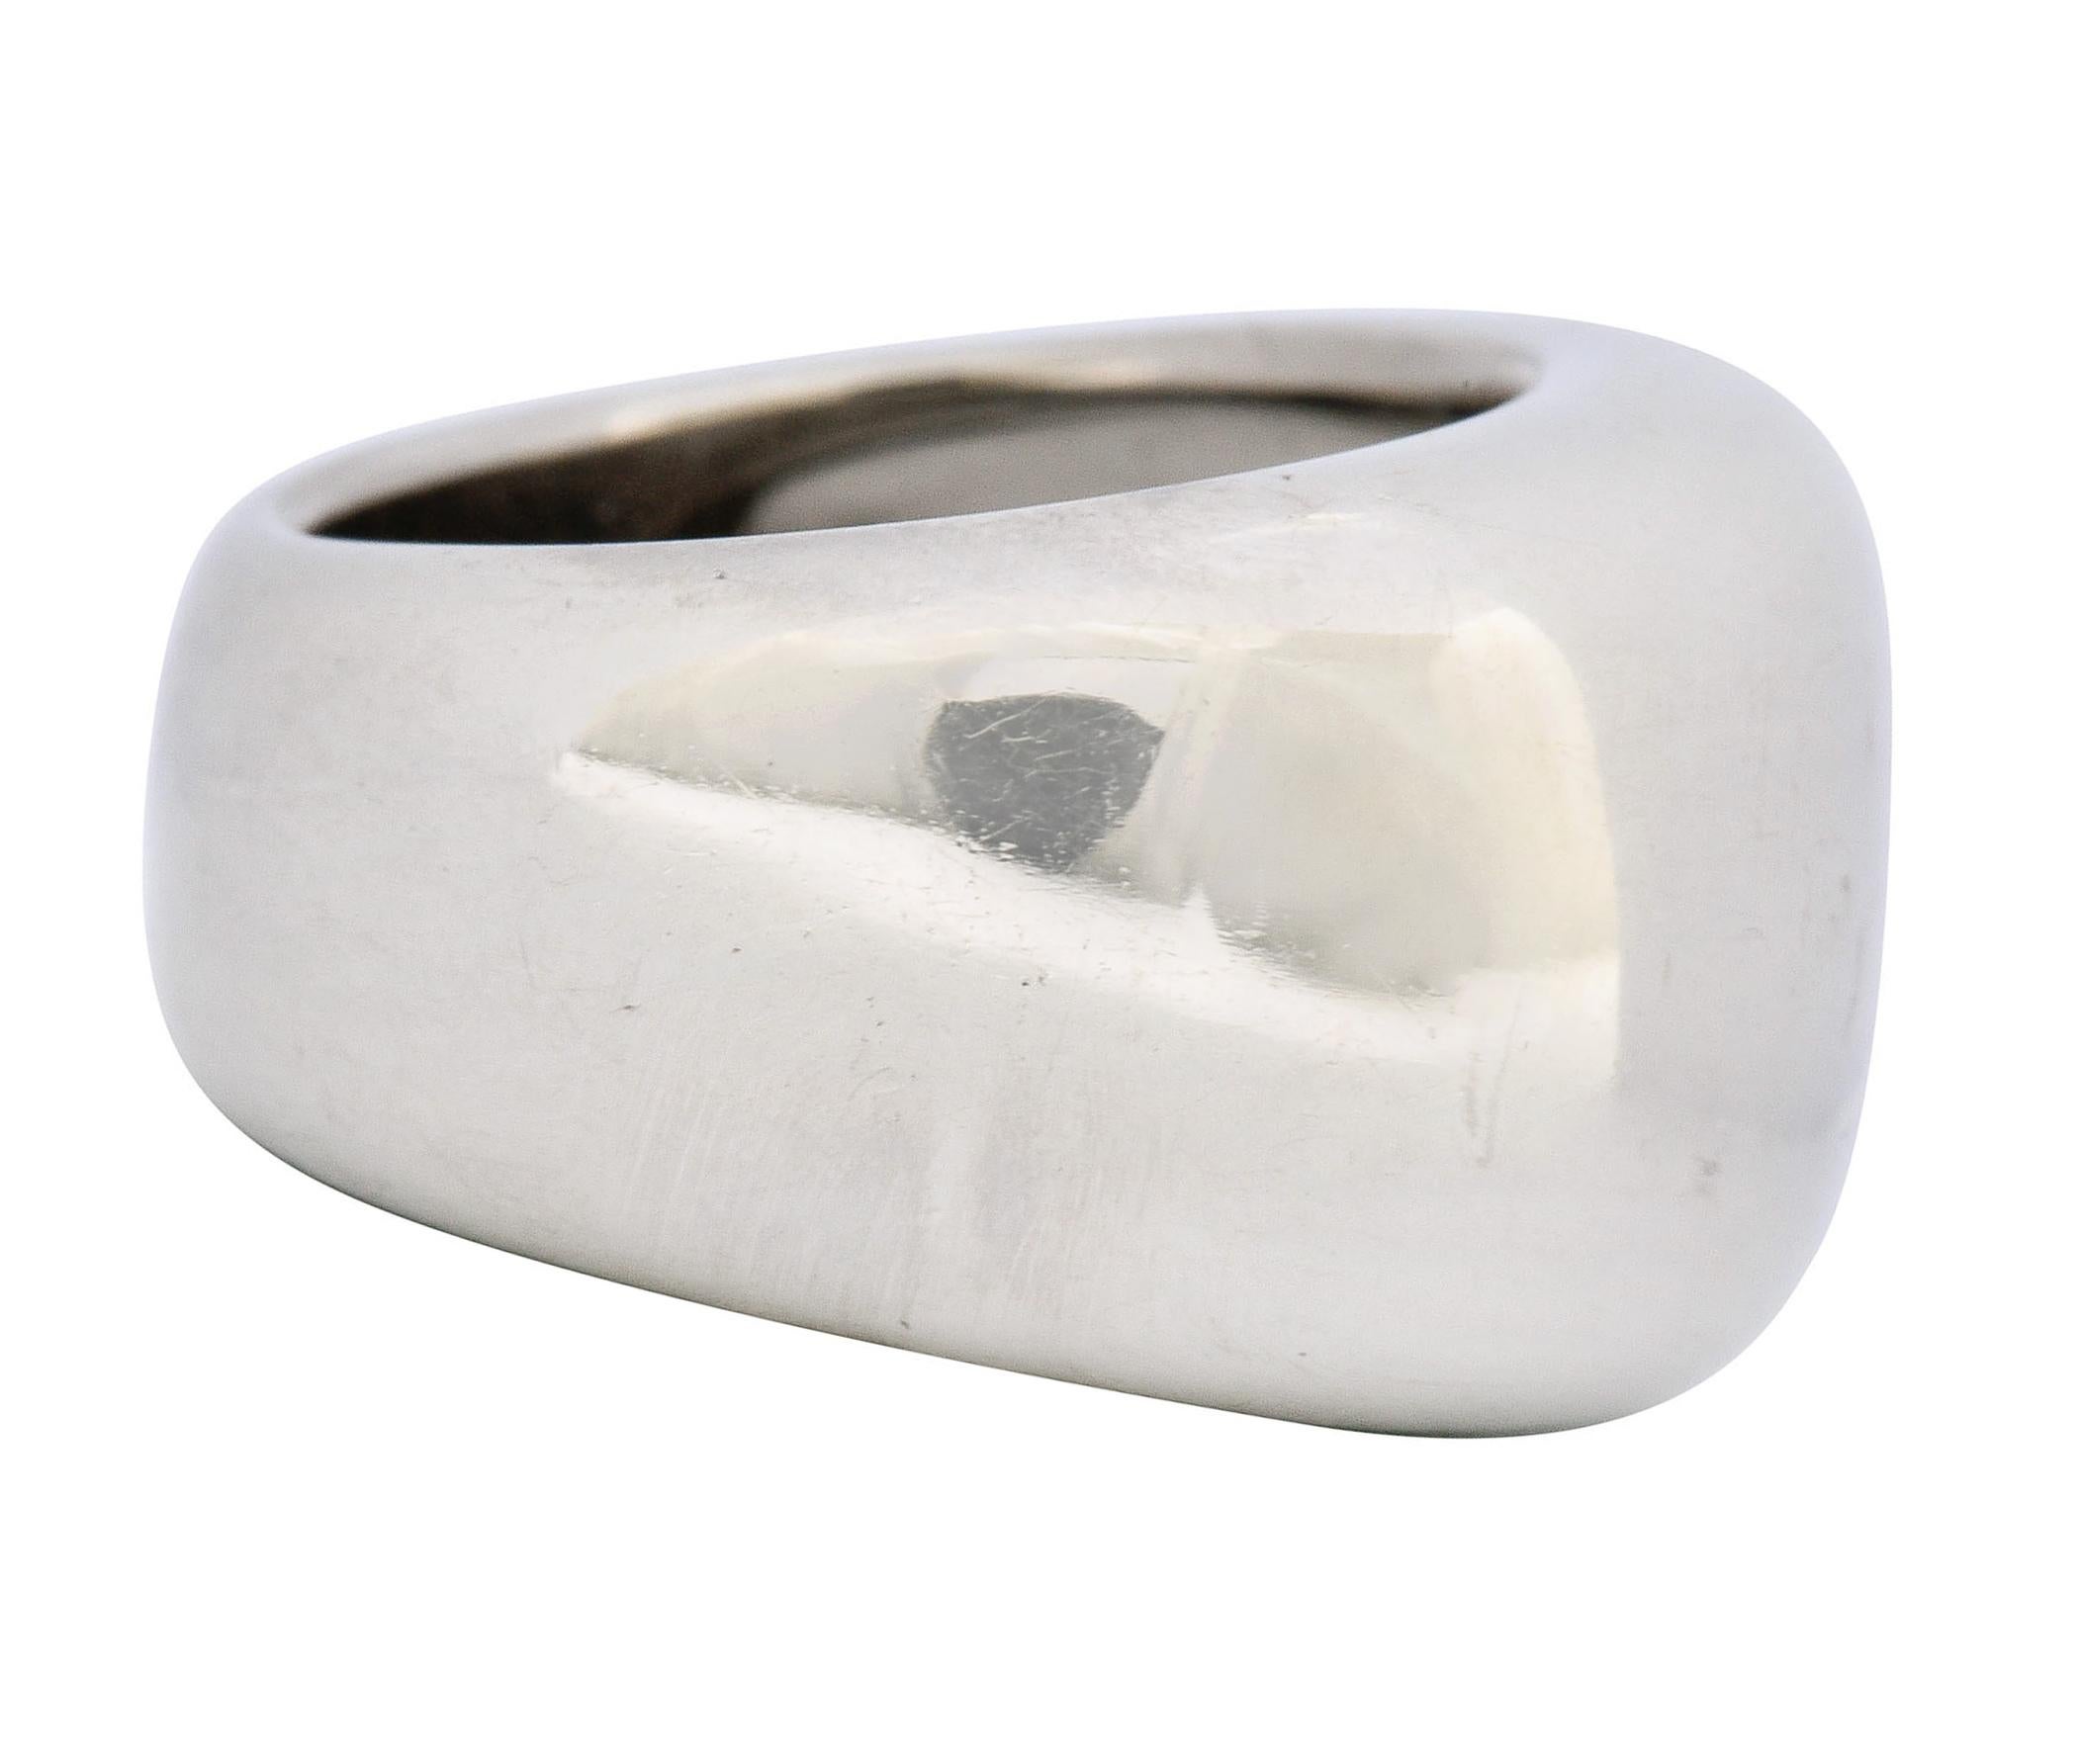 Designed as a puffed and polished band ring

Tapering in width from top to bottom

With maker's mark at base of shank

Numbered and fully signed Cartier

Stamped 750 for 18 karat gold

From the vintage Nouvelle collection, circa 1997